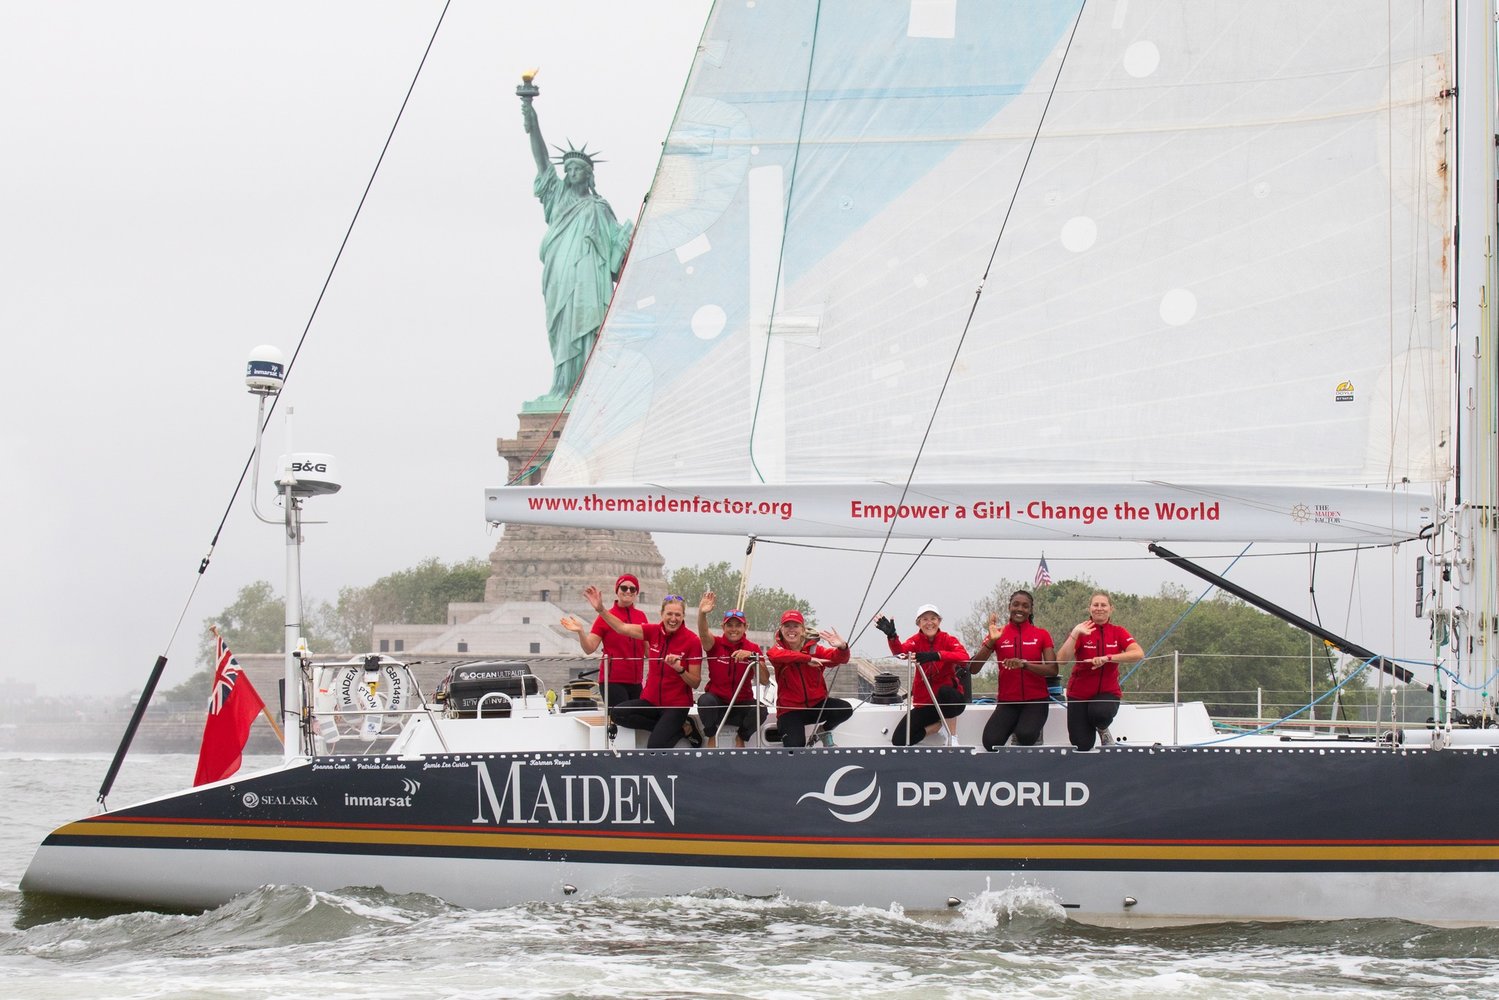 The crew of Maiden passes in front of the Statue of Liberty during their three-year world tour to raise awareness of education for girls.